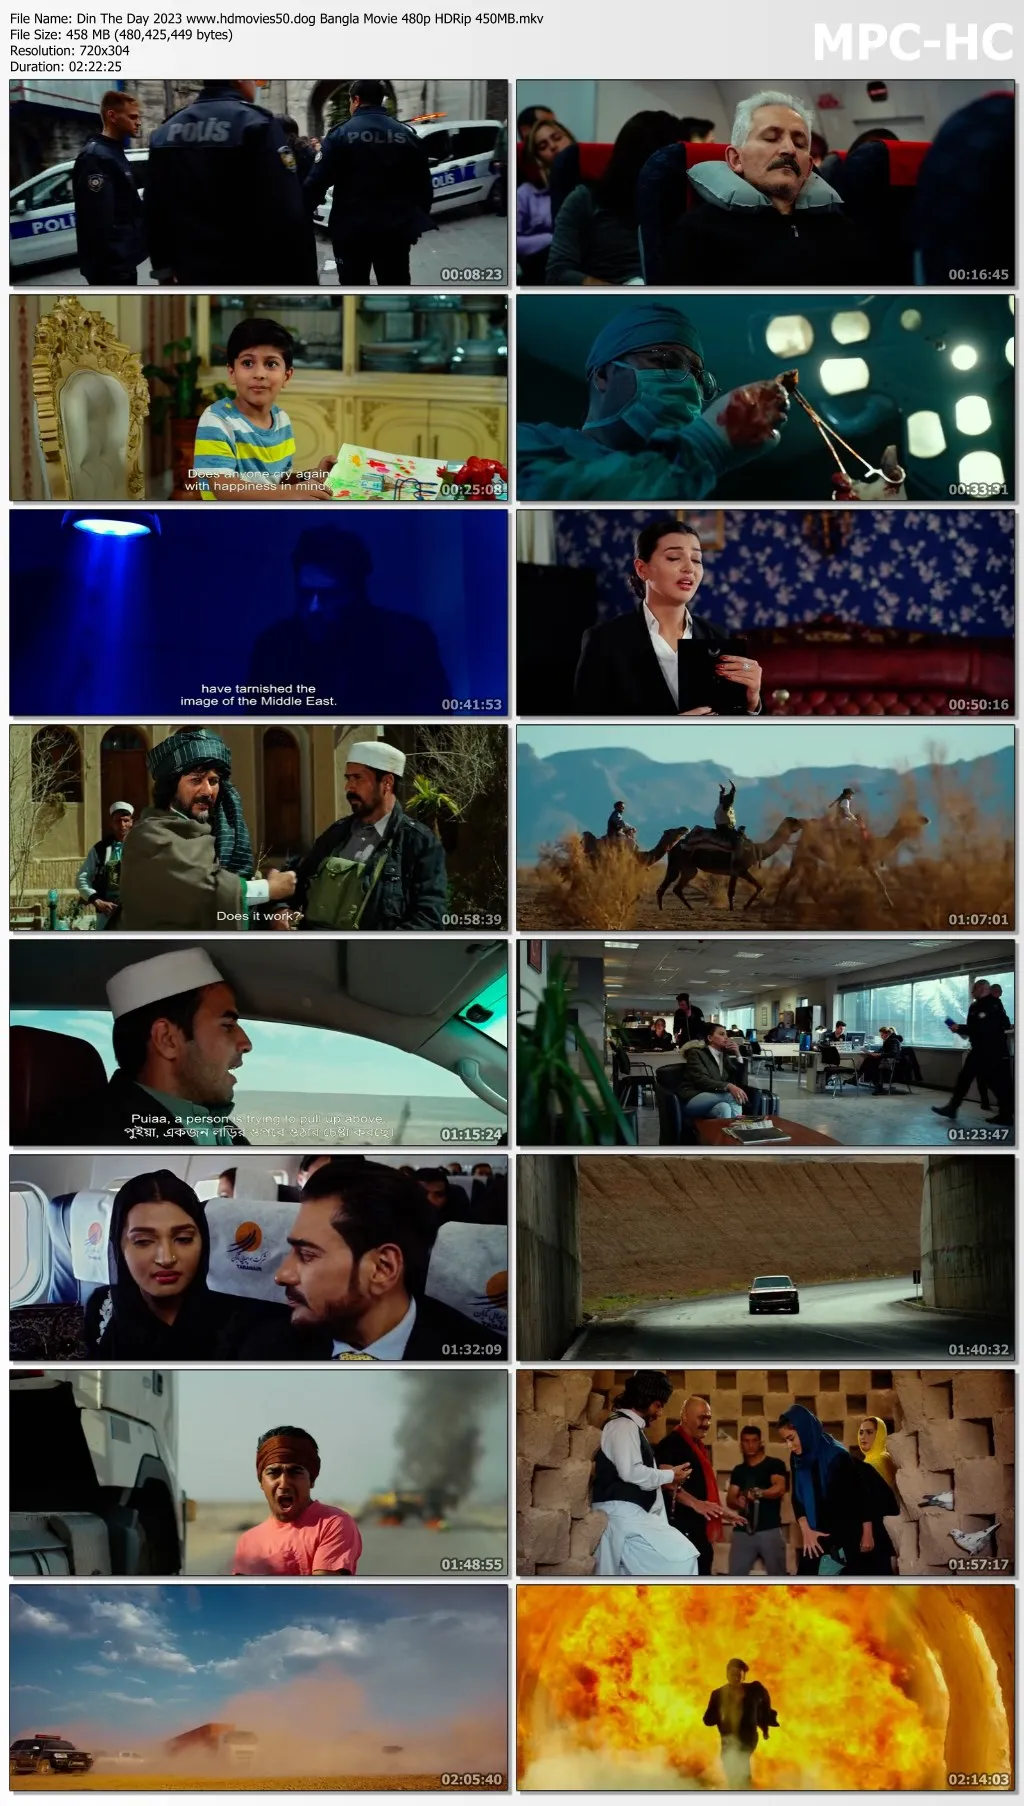 Din The Day 2023 Bangla Movie 1080p HDRip 2.6GB Download